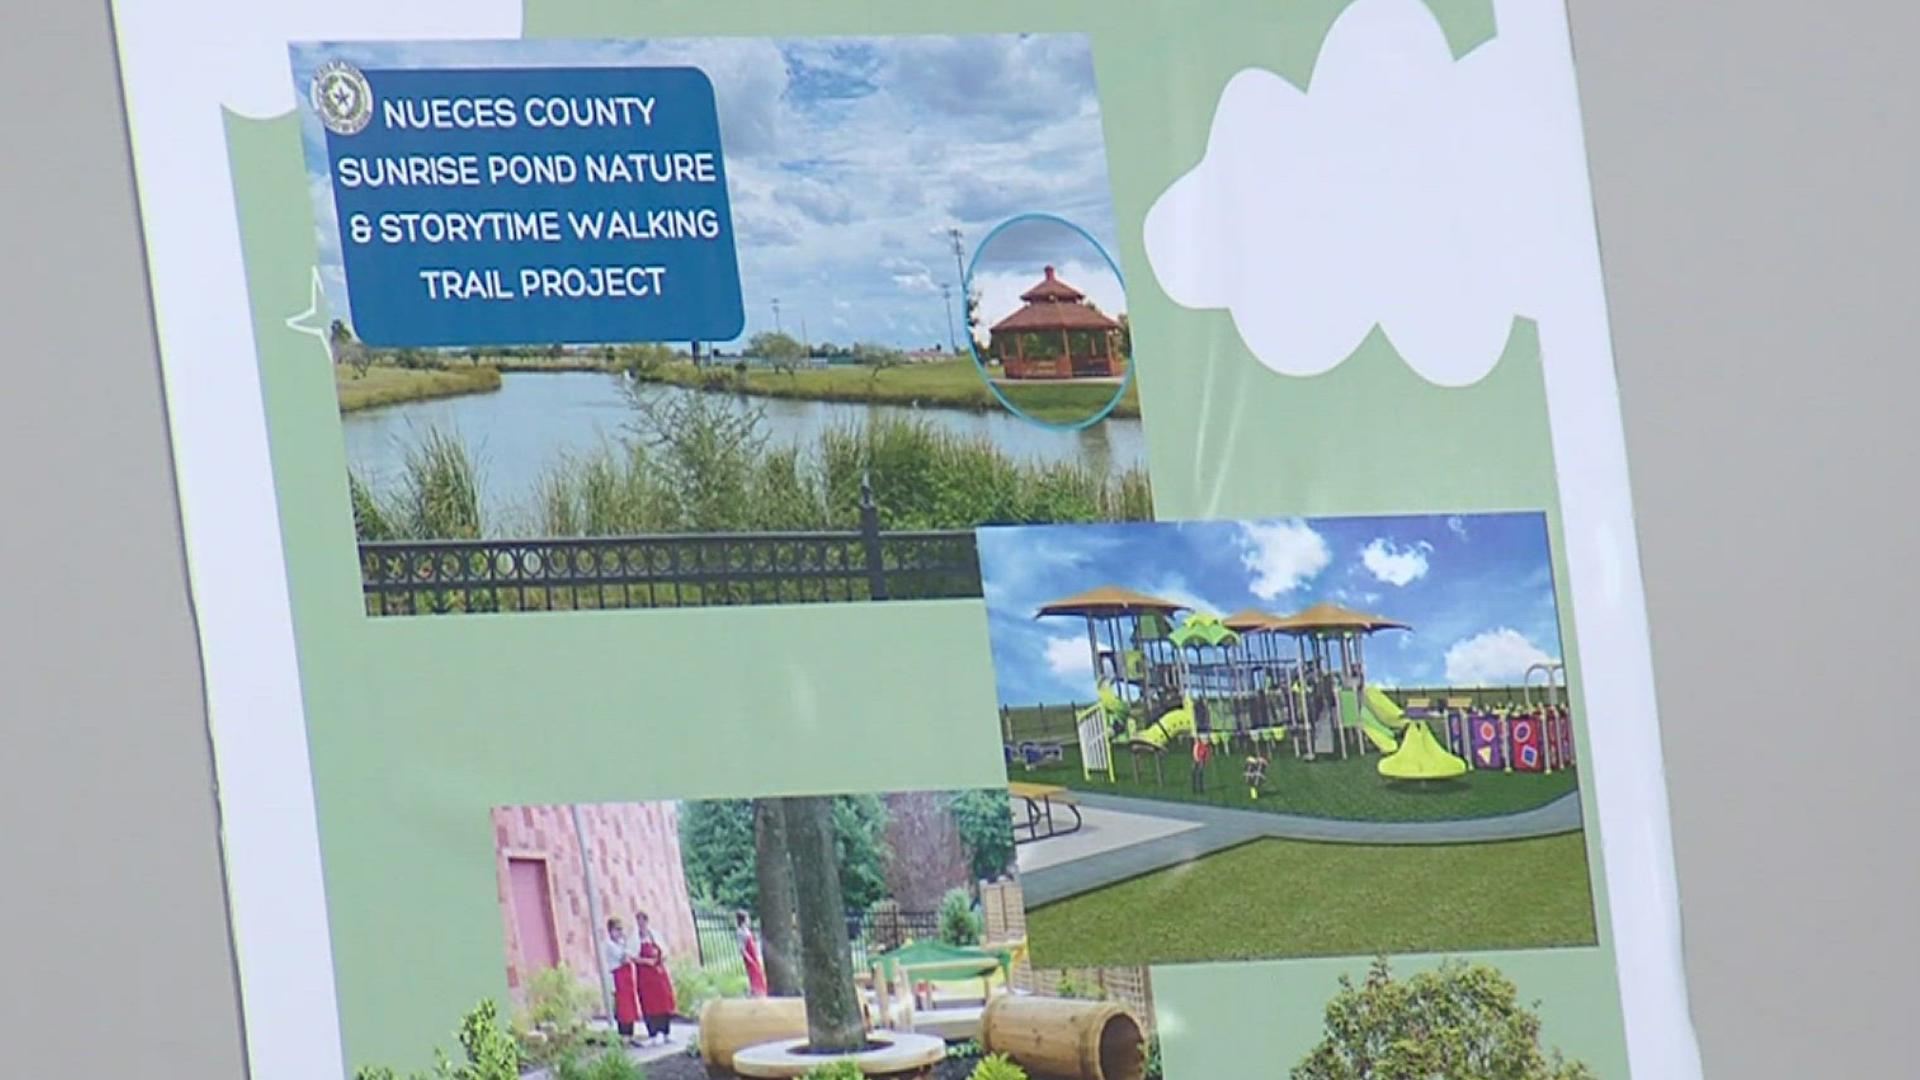 The project promises to beautify an already bustling part of Robstown with a few upgrades, like a half-mile "Story Walk Trail," improved lighting and seating areas.